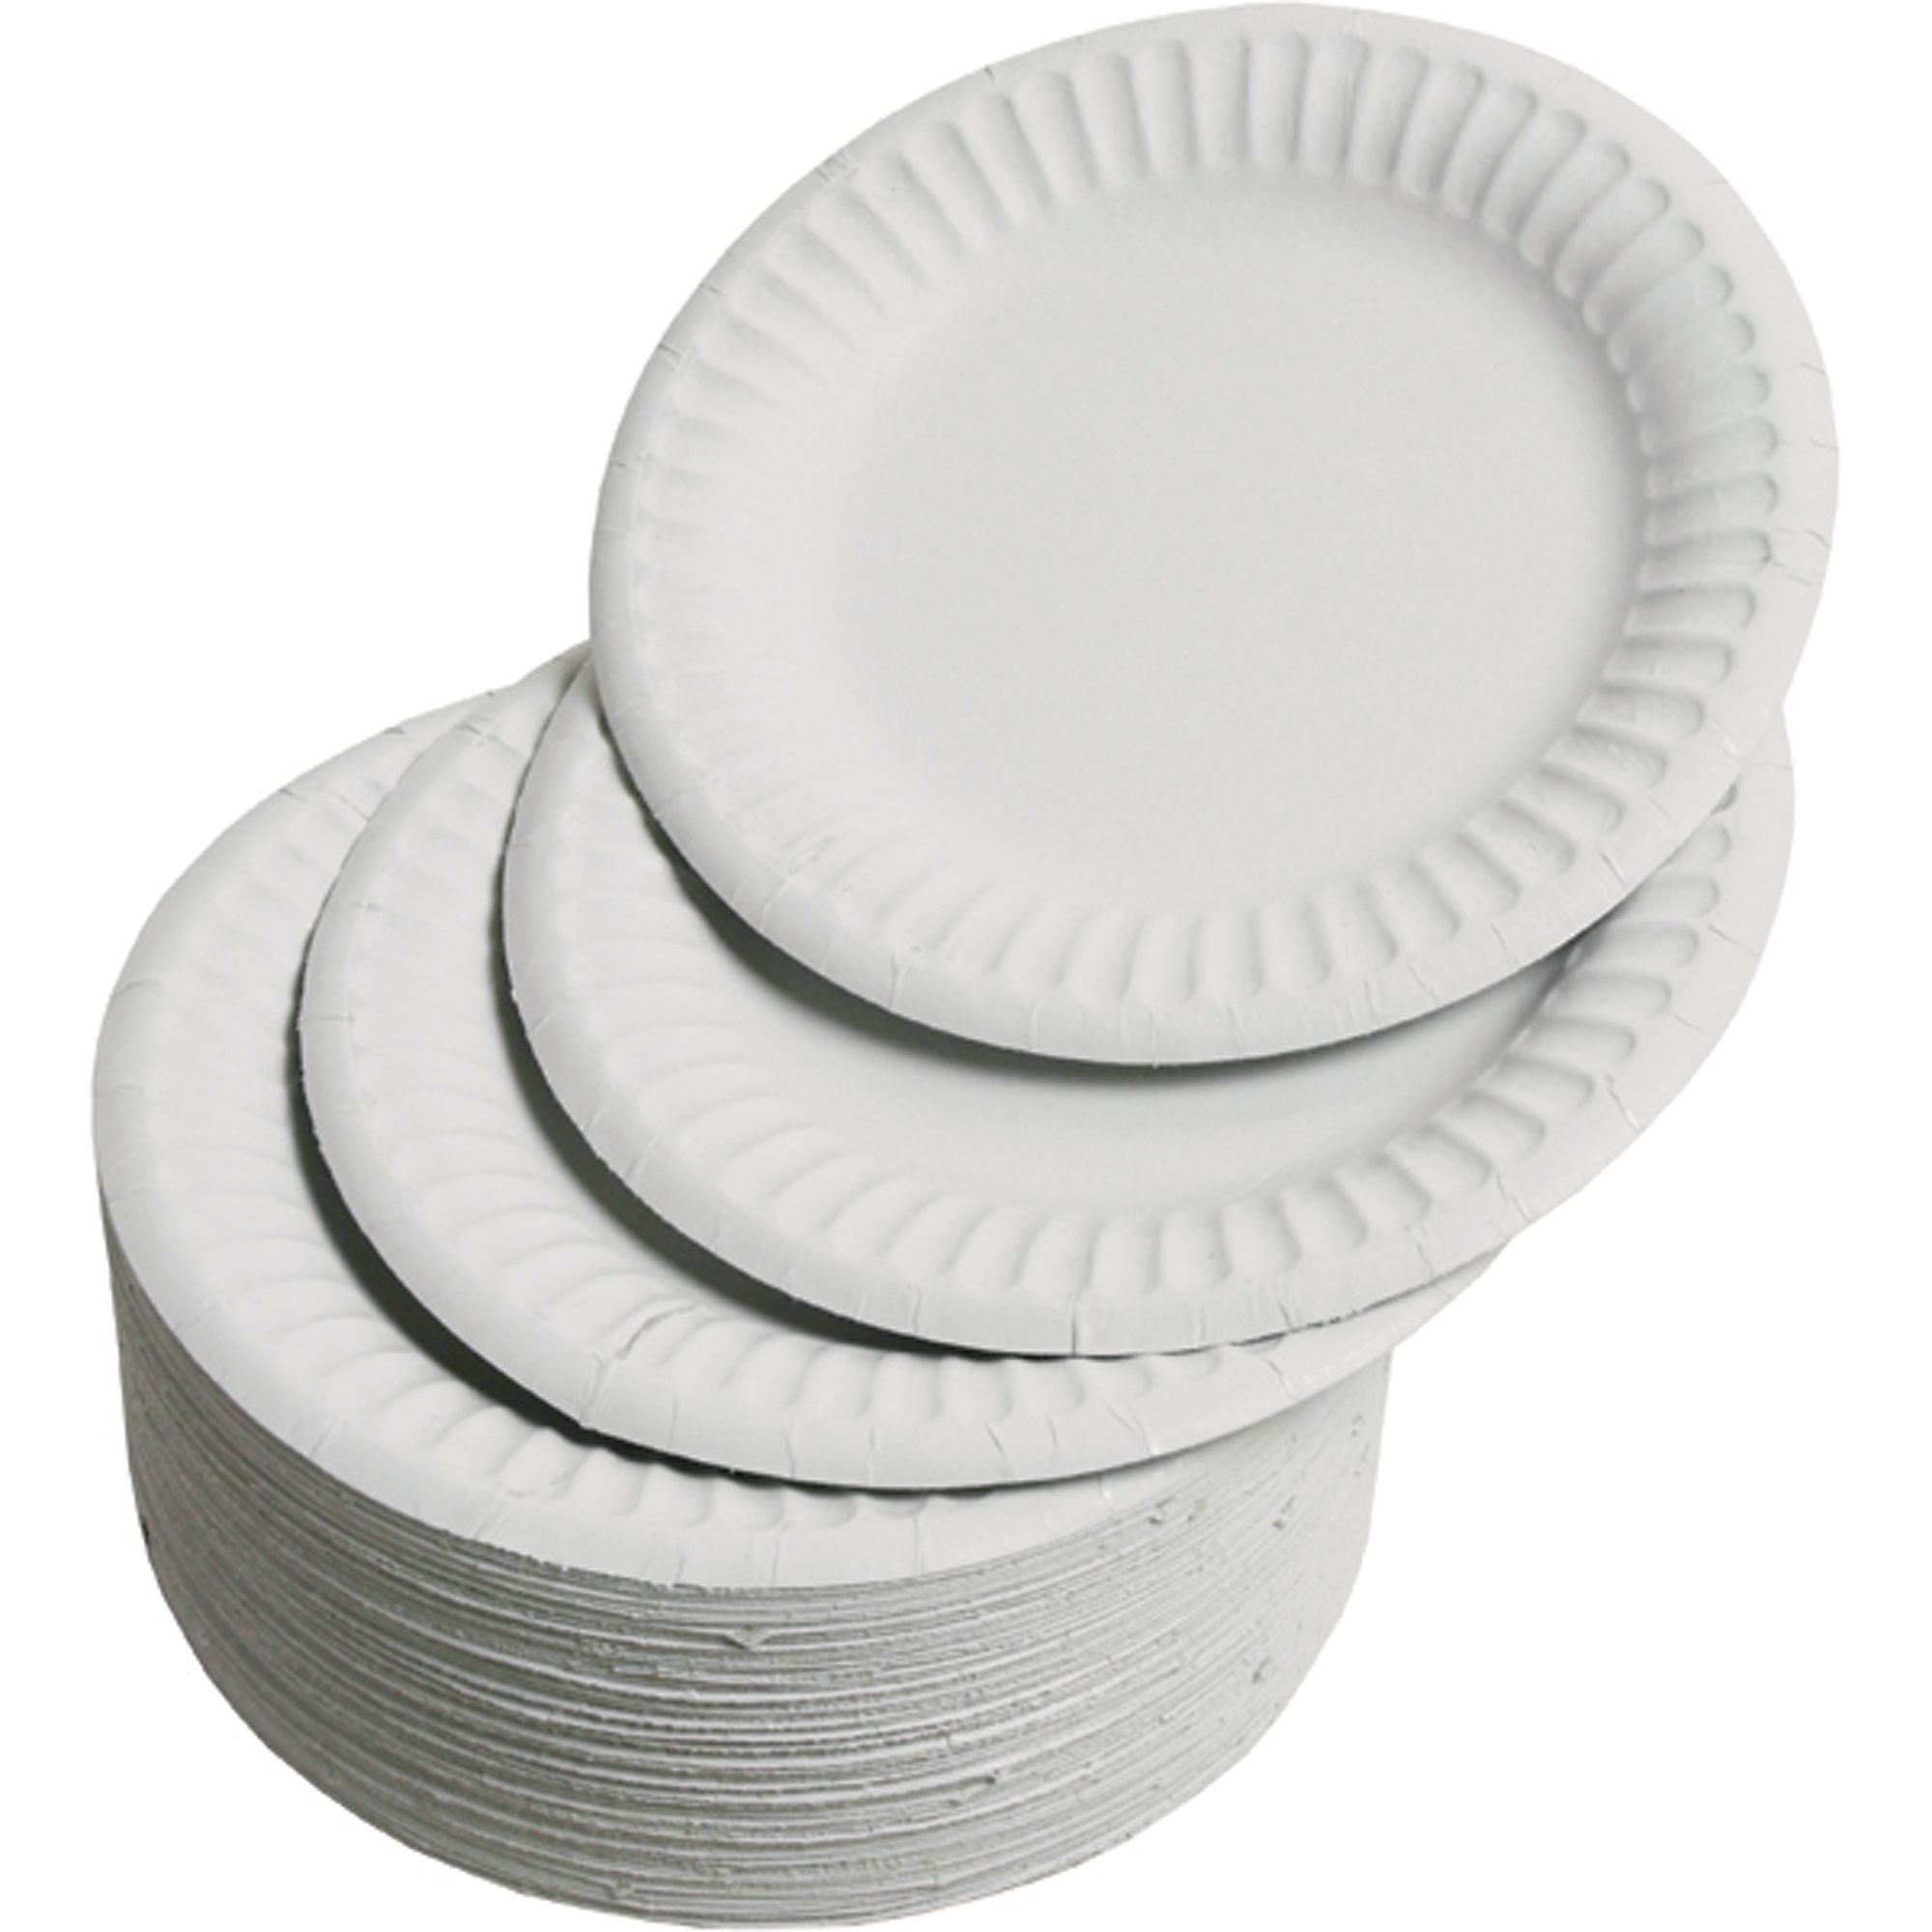 HE469410 - Paper Plates - 180mm - White - Pack of 1000 | Findel Education